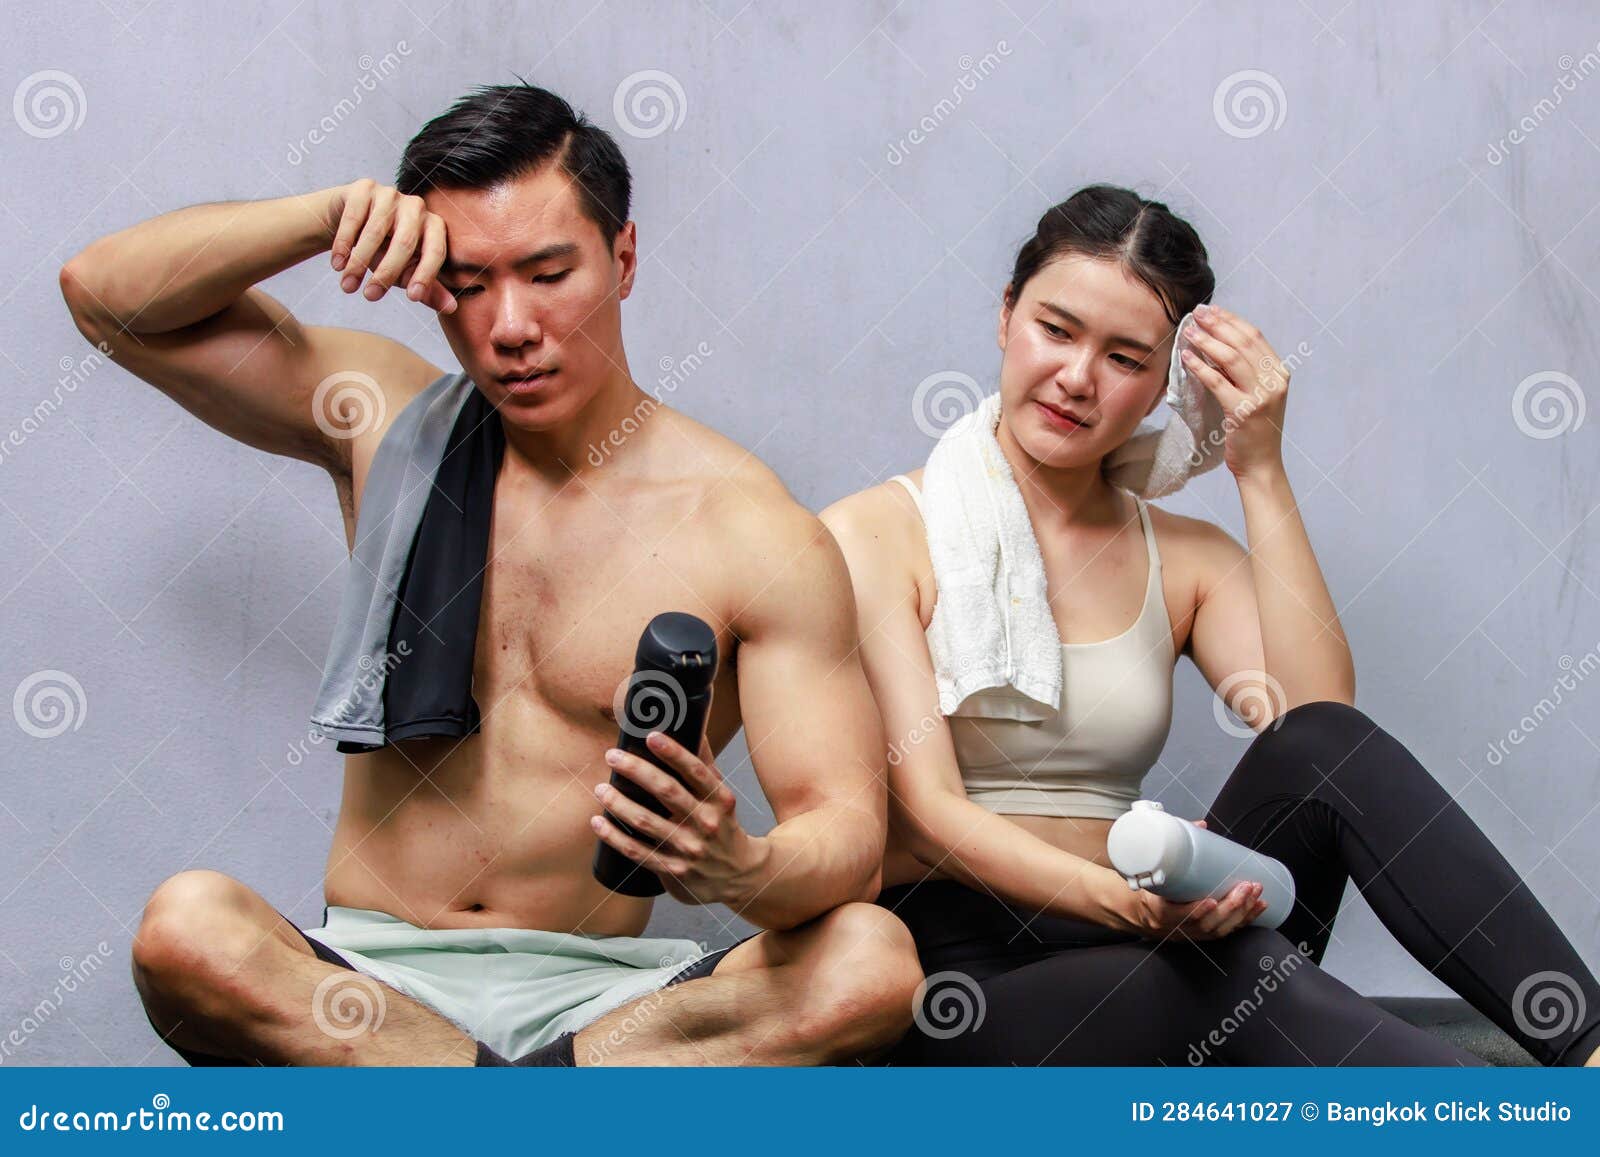 Asian Fit Strong Handsome Shirtless Male Fitness Model with Young Female Athlete Friend in Sport Bra Sitting Taking Break Drink Stock Image picture